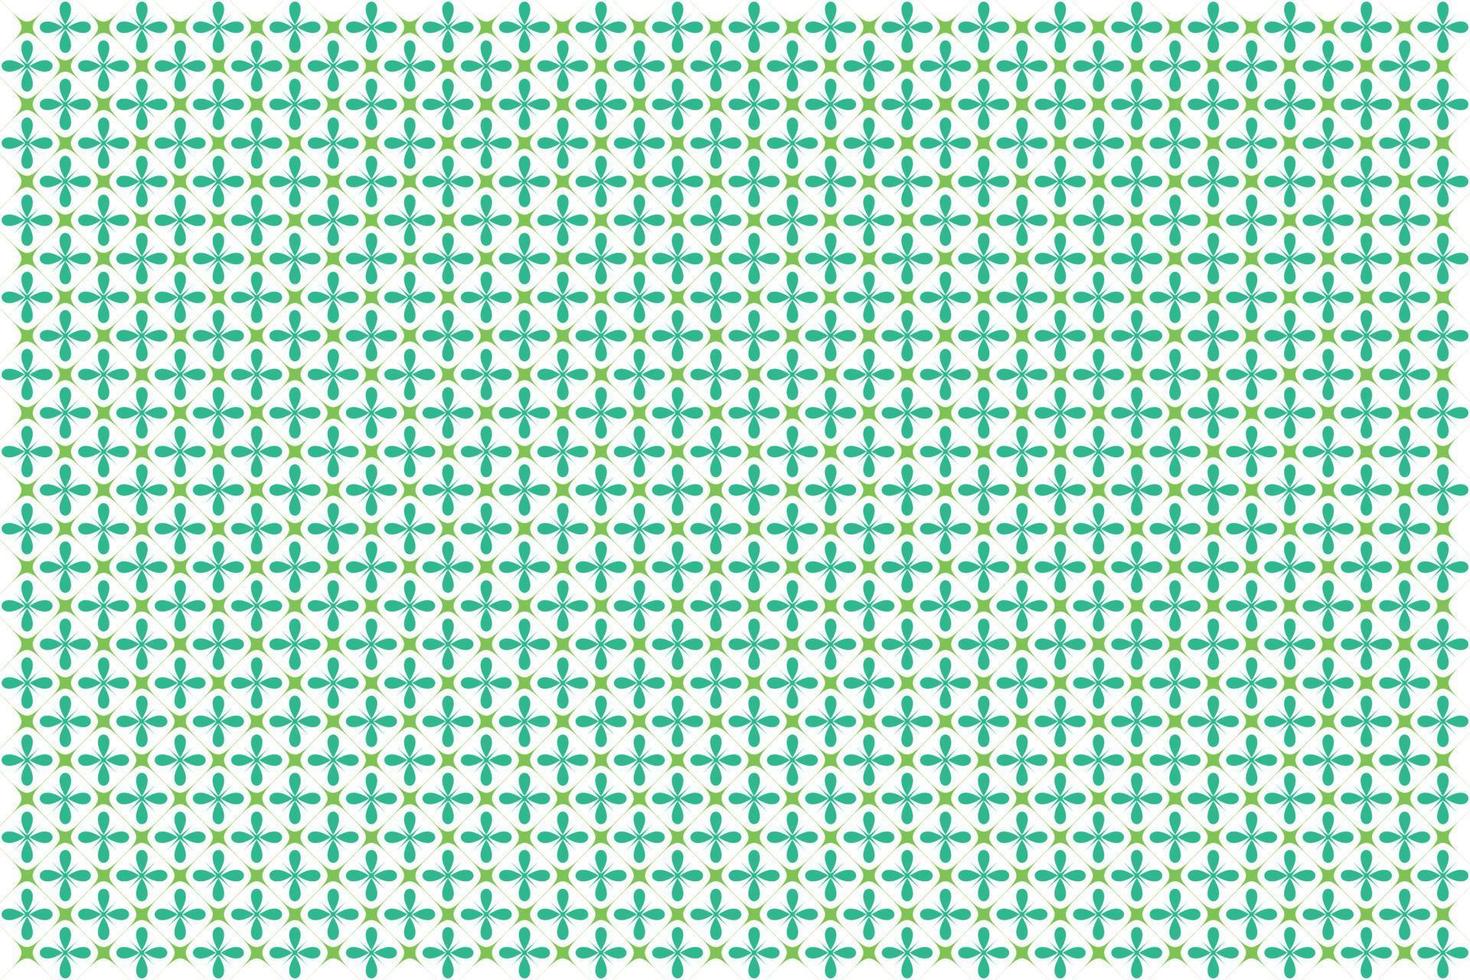 Abstract pattern background vector design